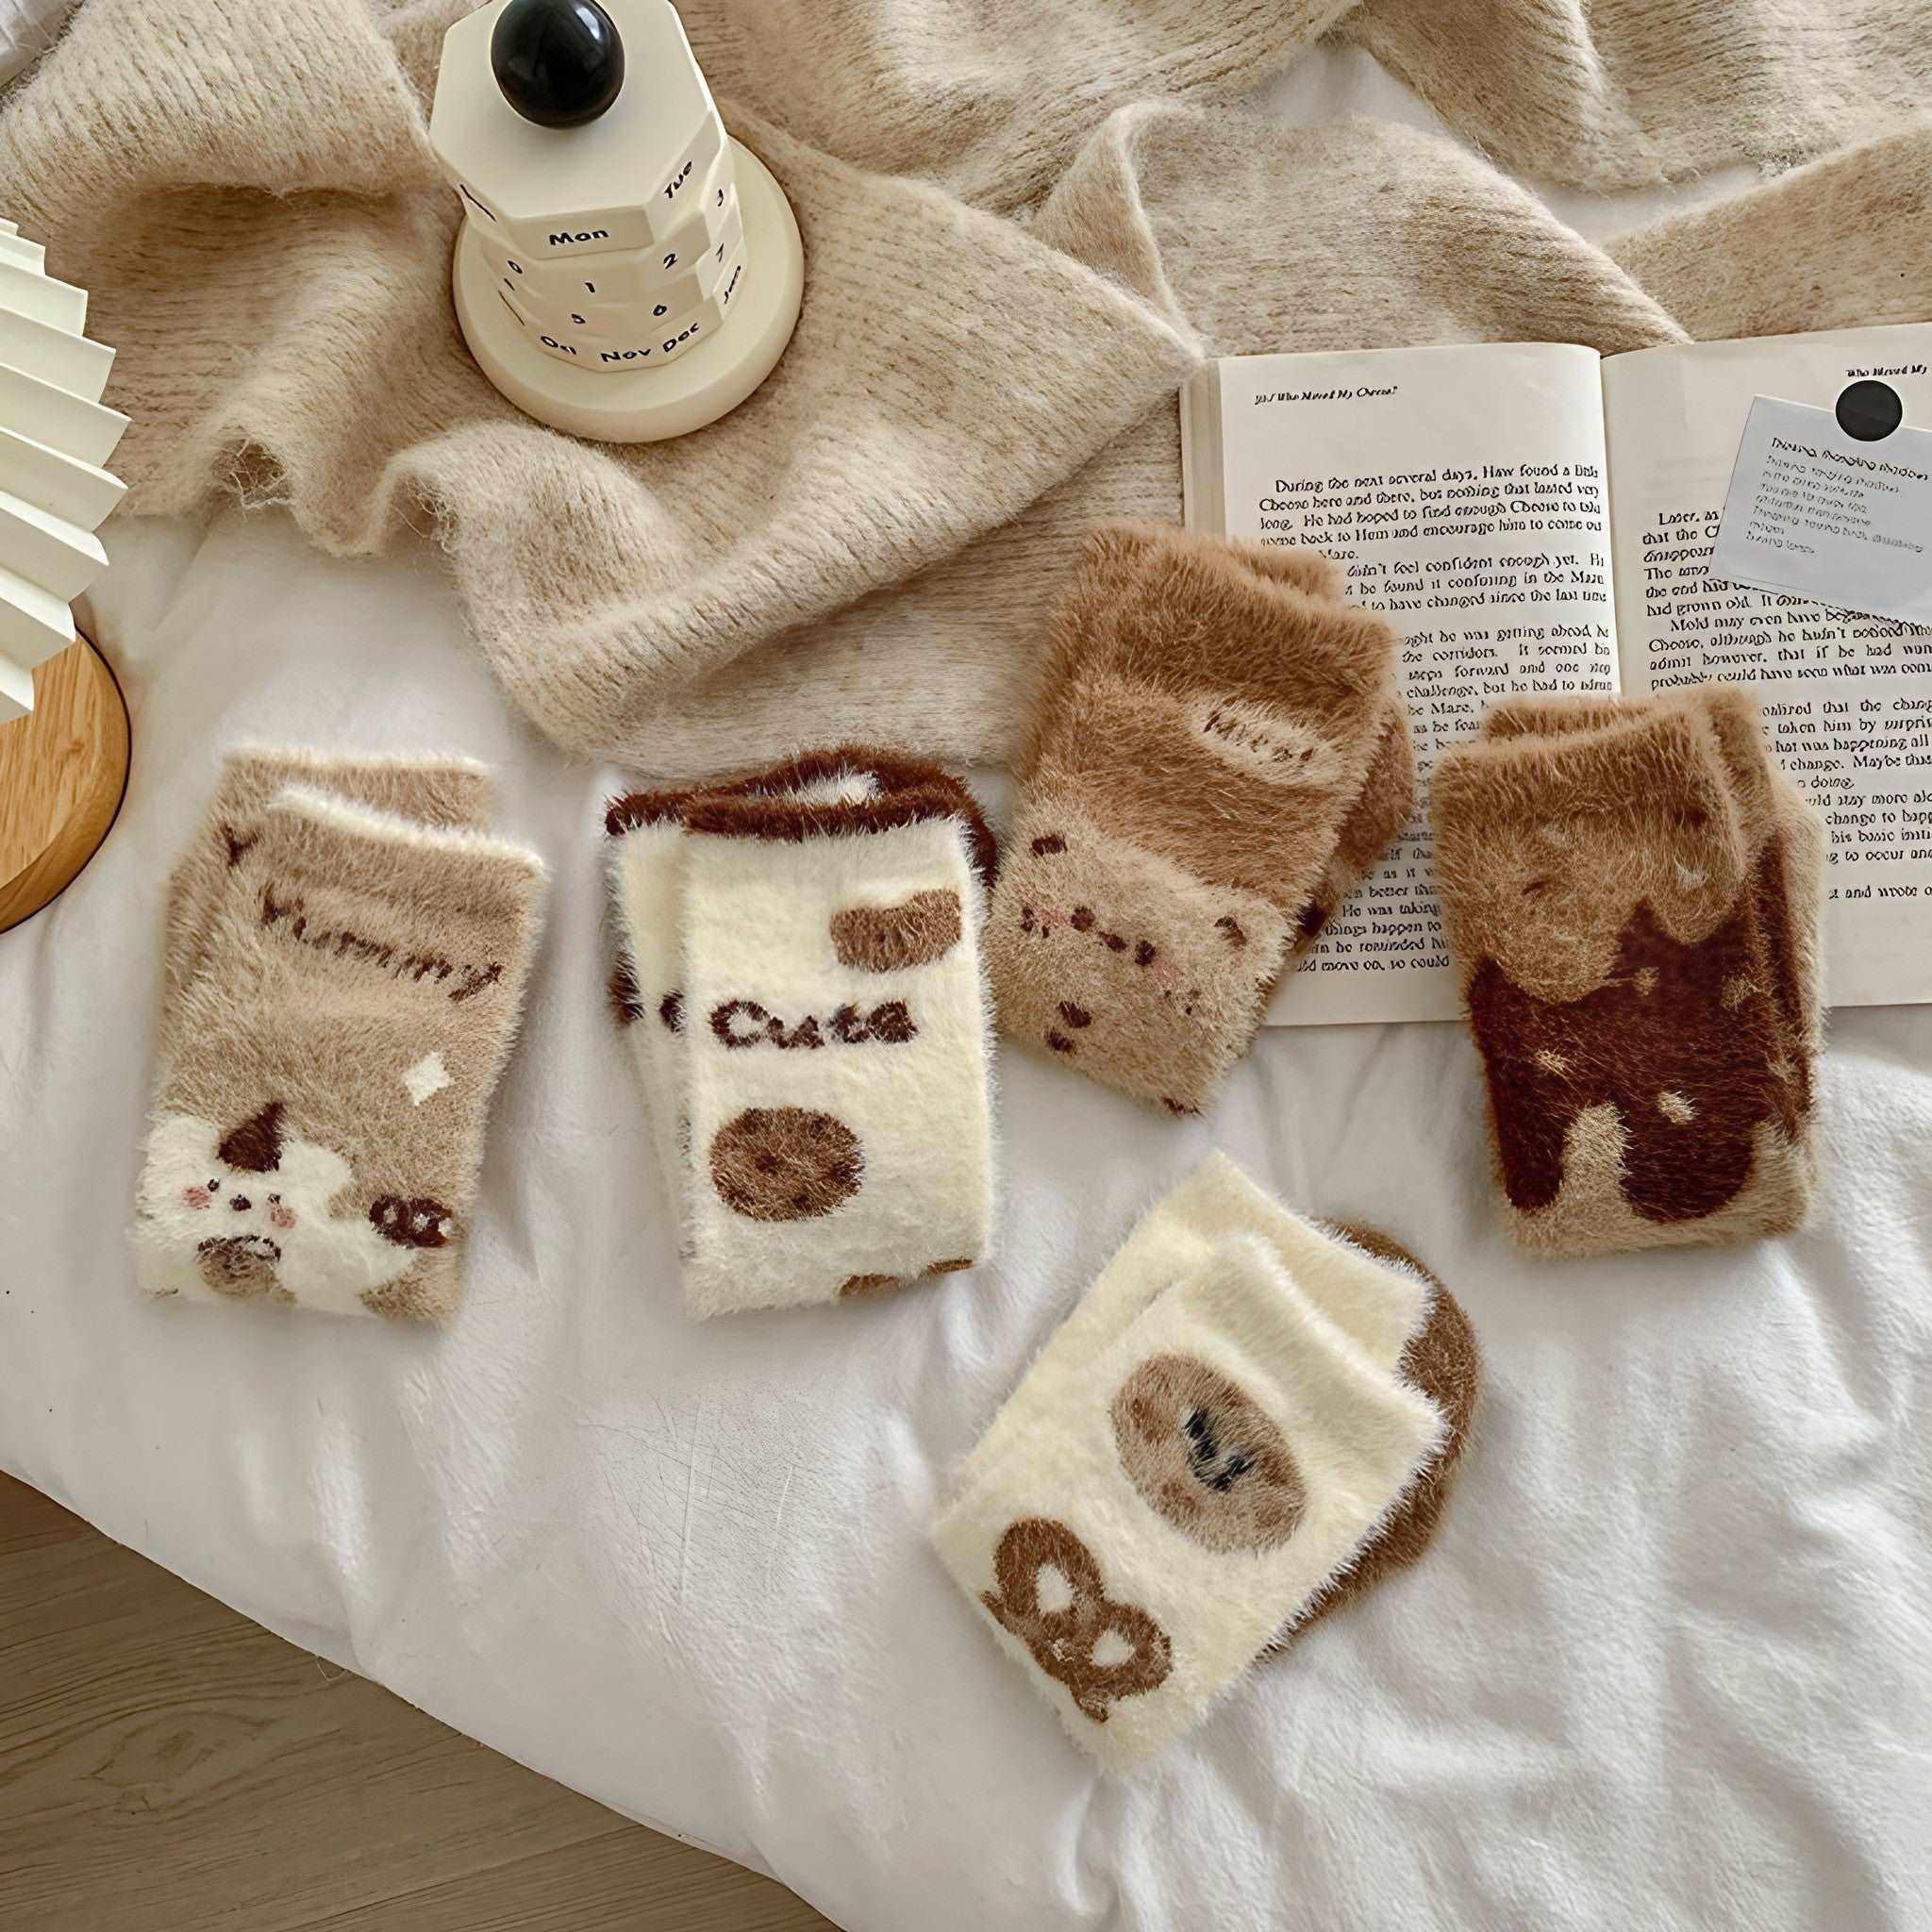 Assorted thermal plush socks displayed on a cozy bedding